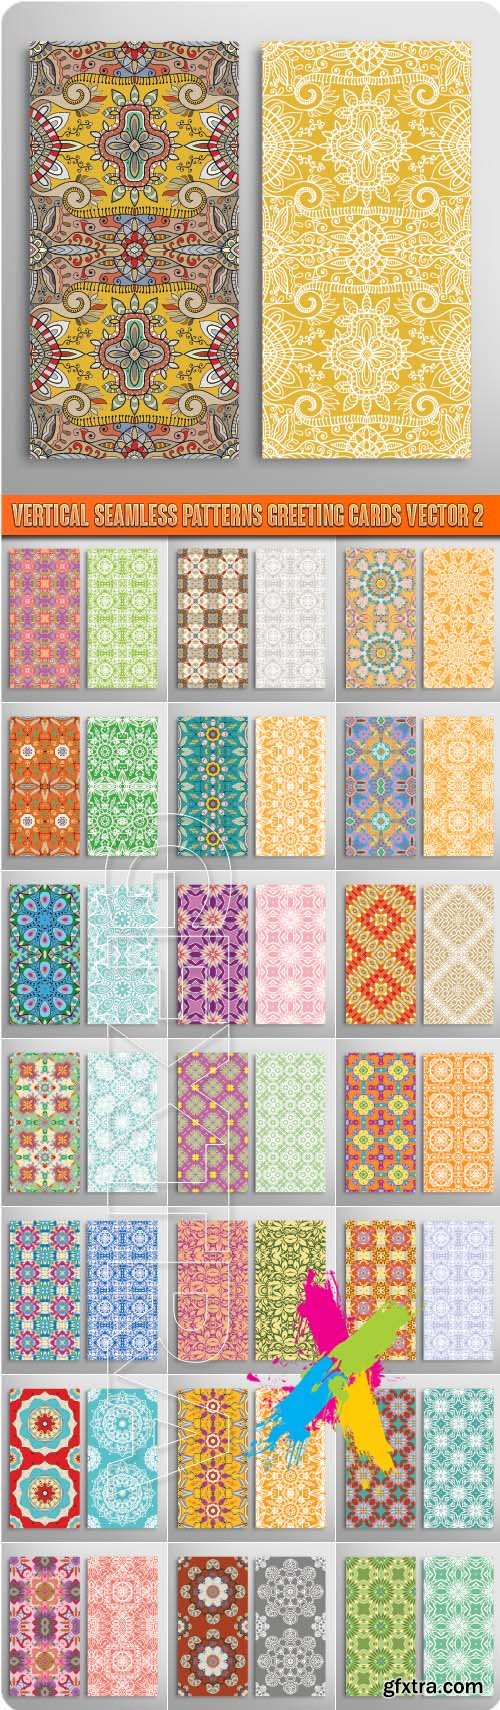 Vertical seamless patterns greeting cards vector 2